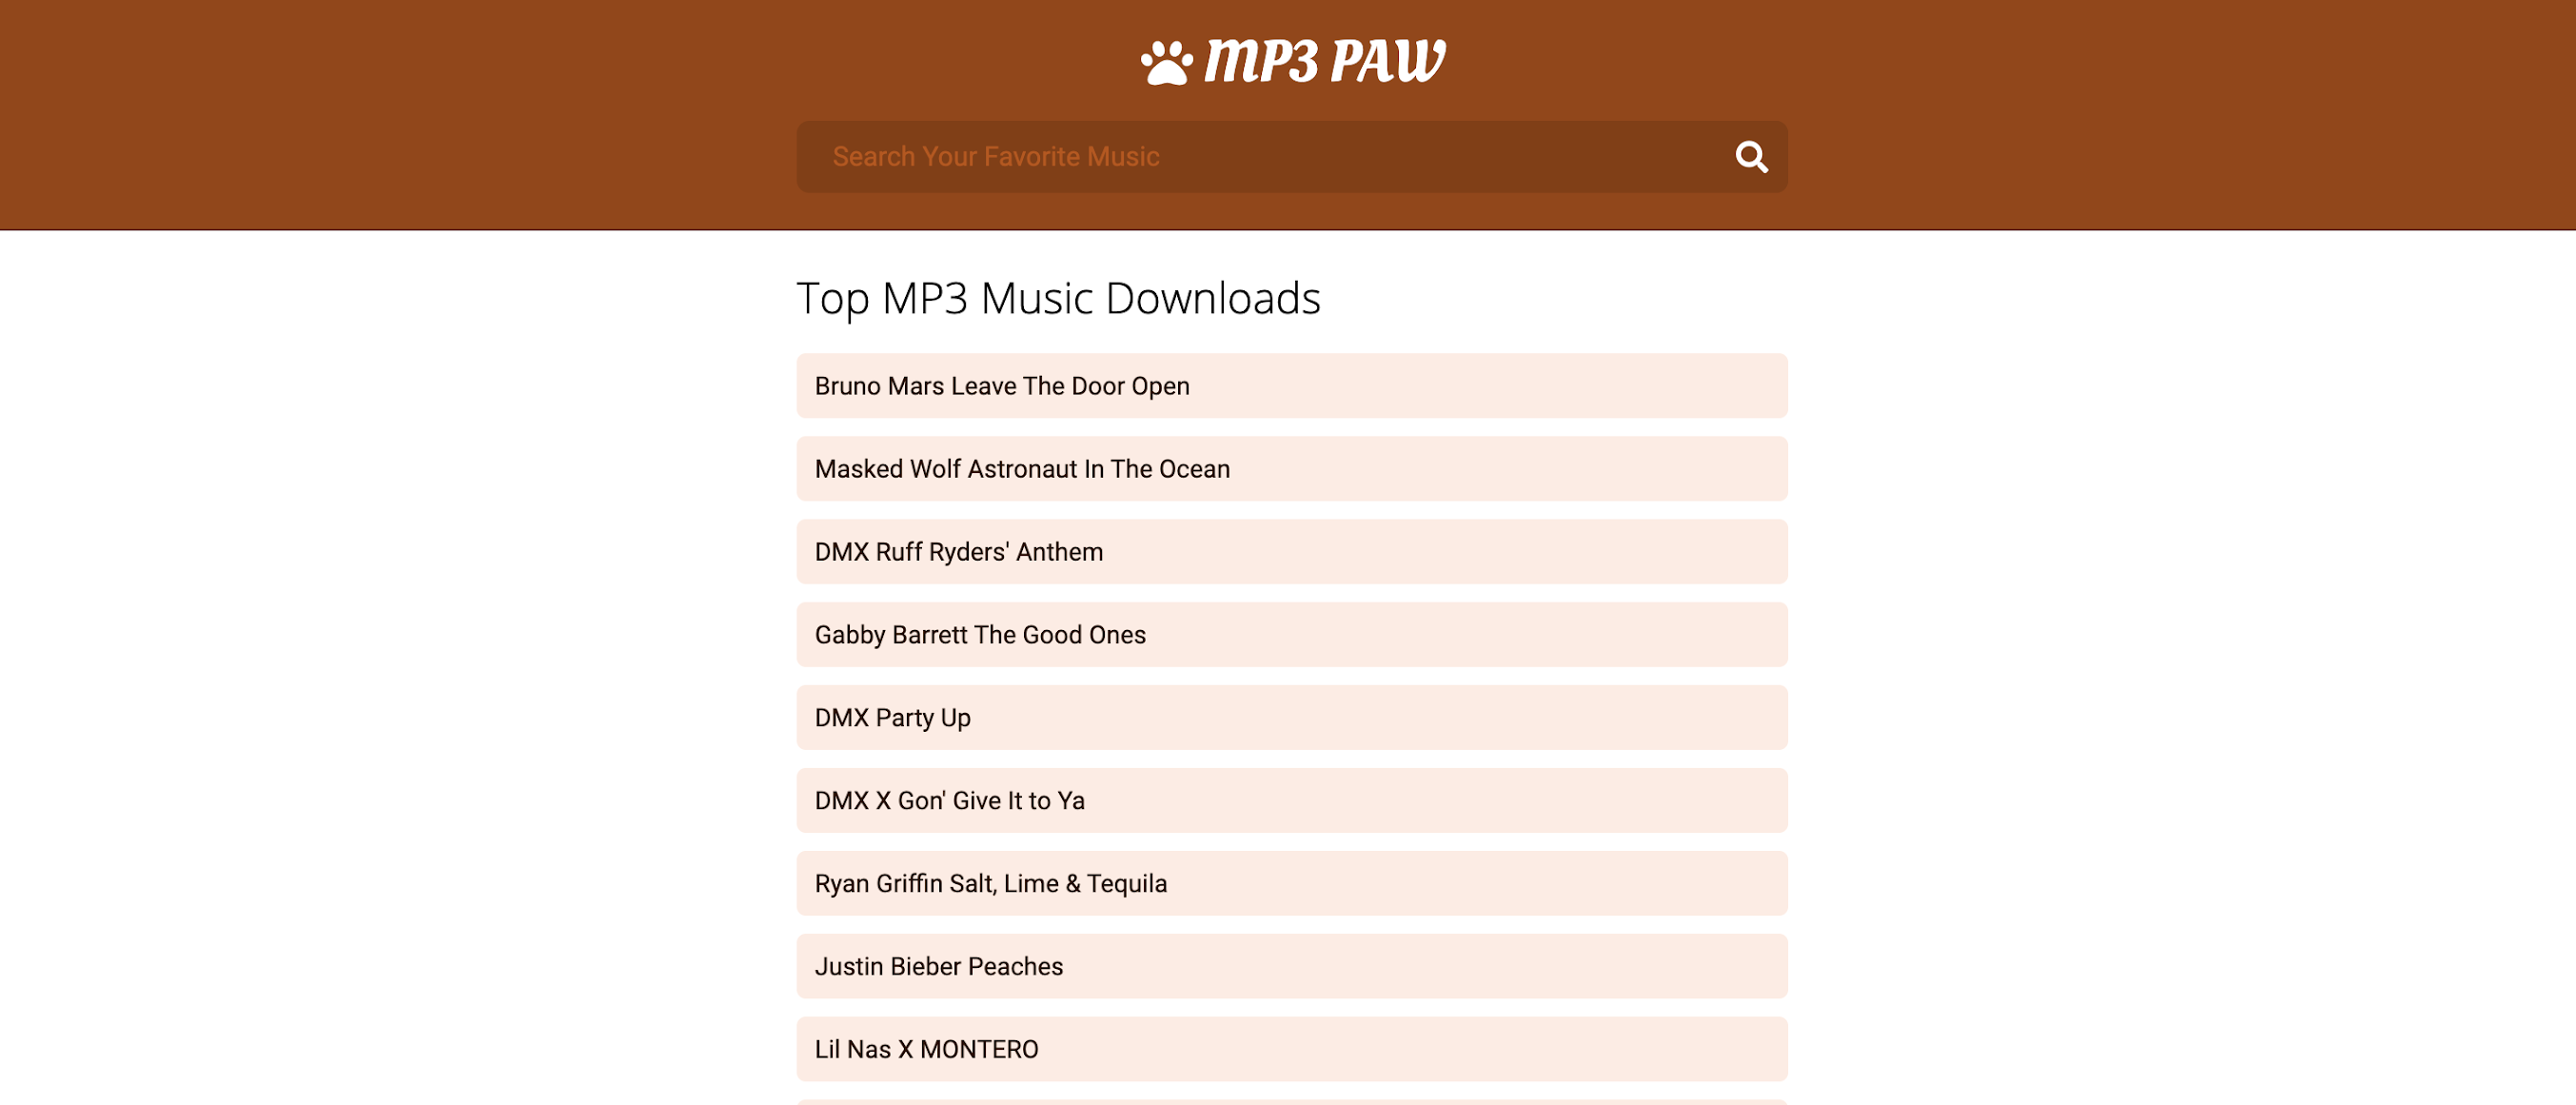 Mp3paw (Mp3paw.lol) Reviews 2022: Is Mp3 Paw Safe? and to Download Free MP3